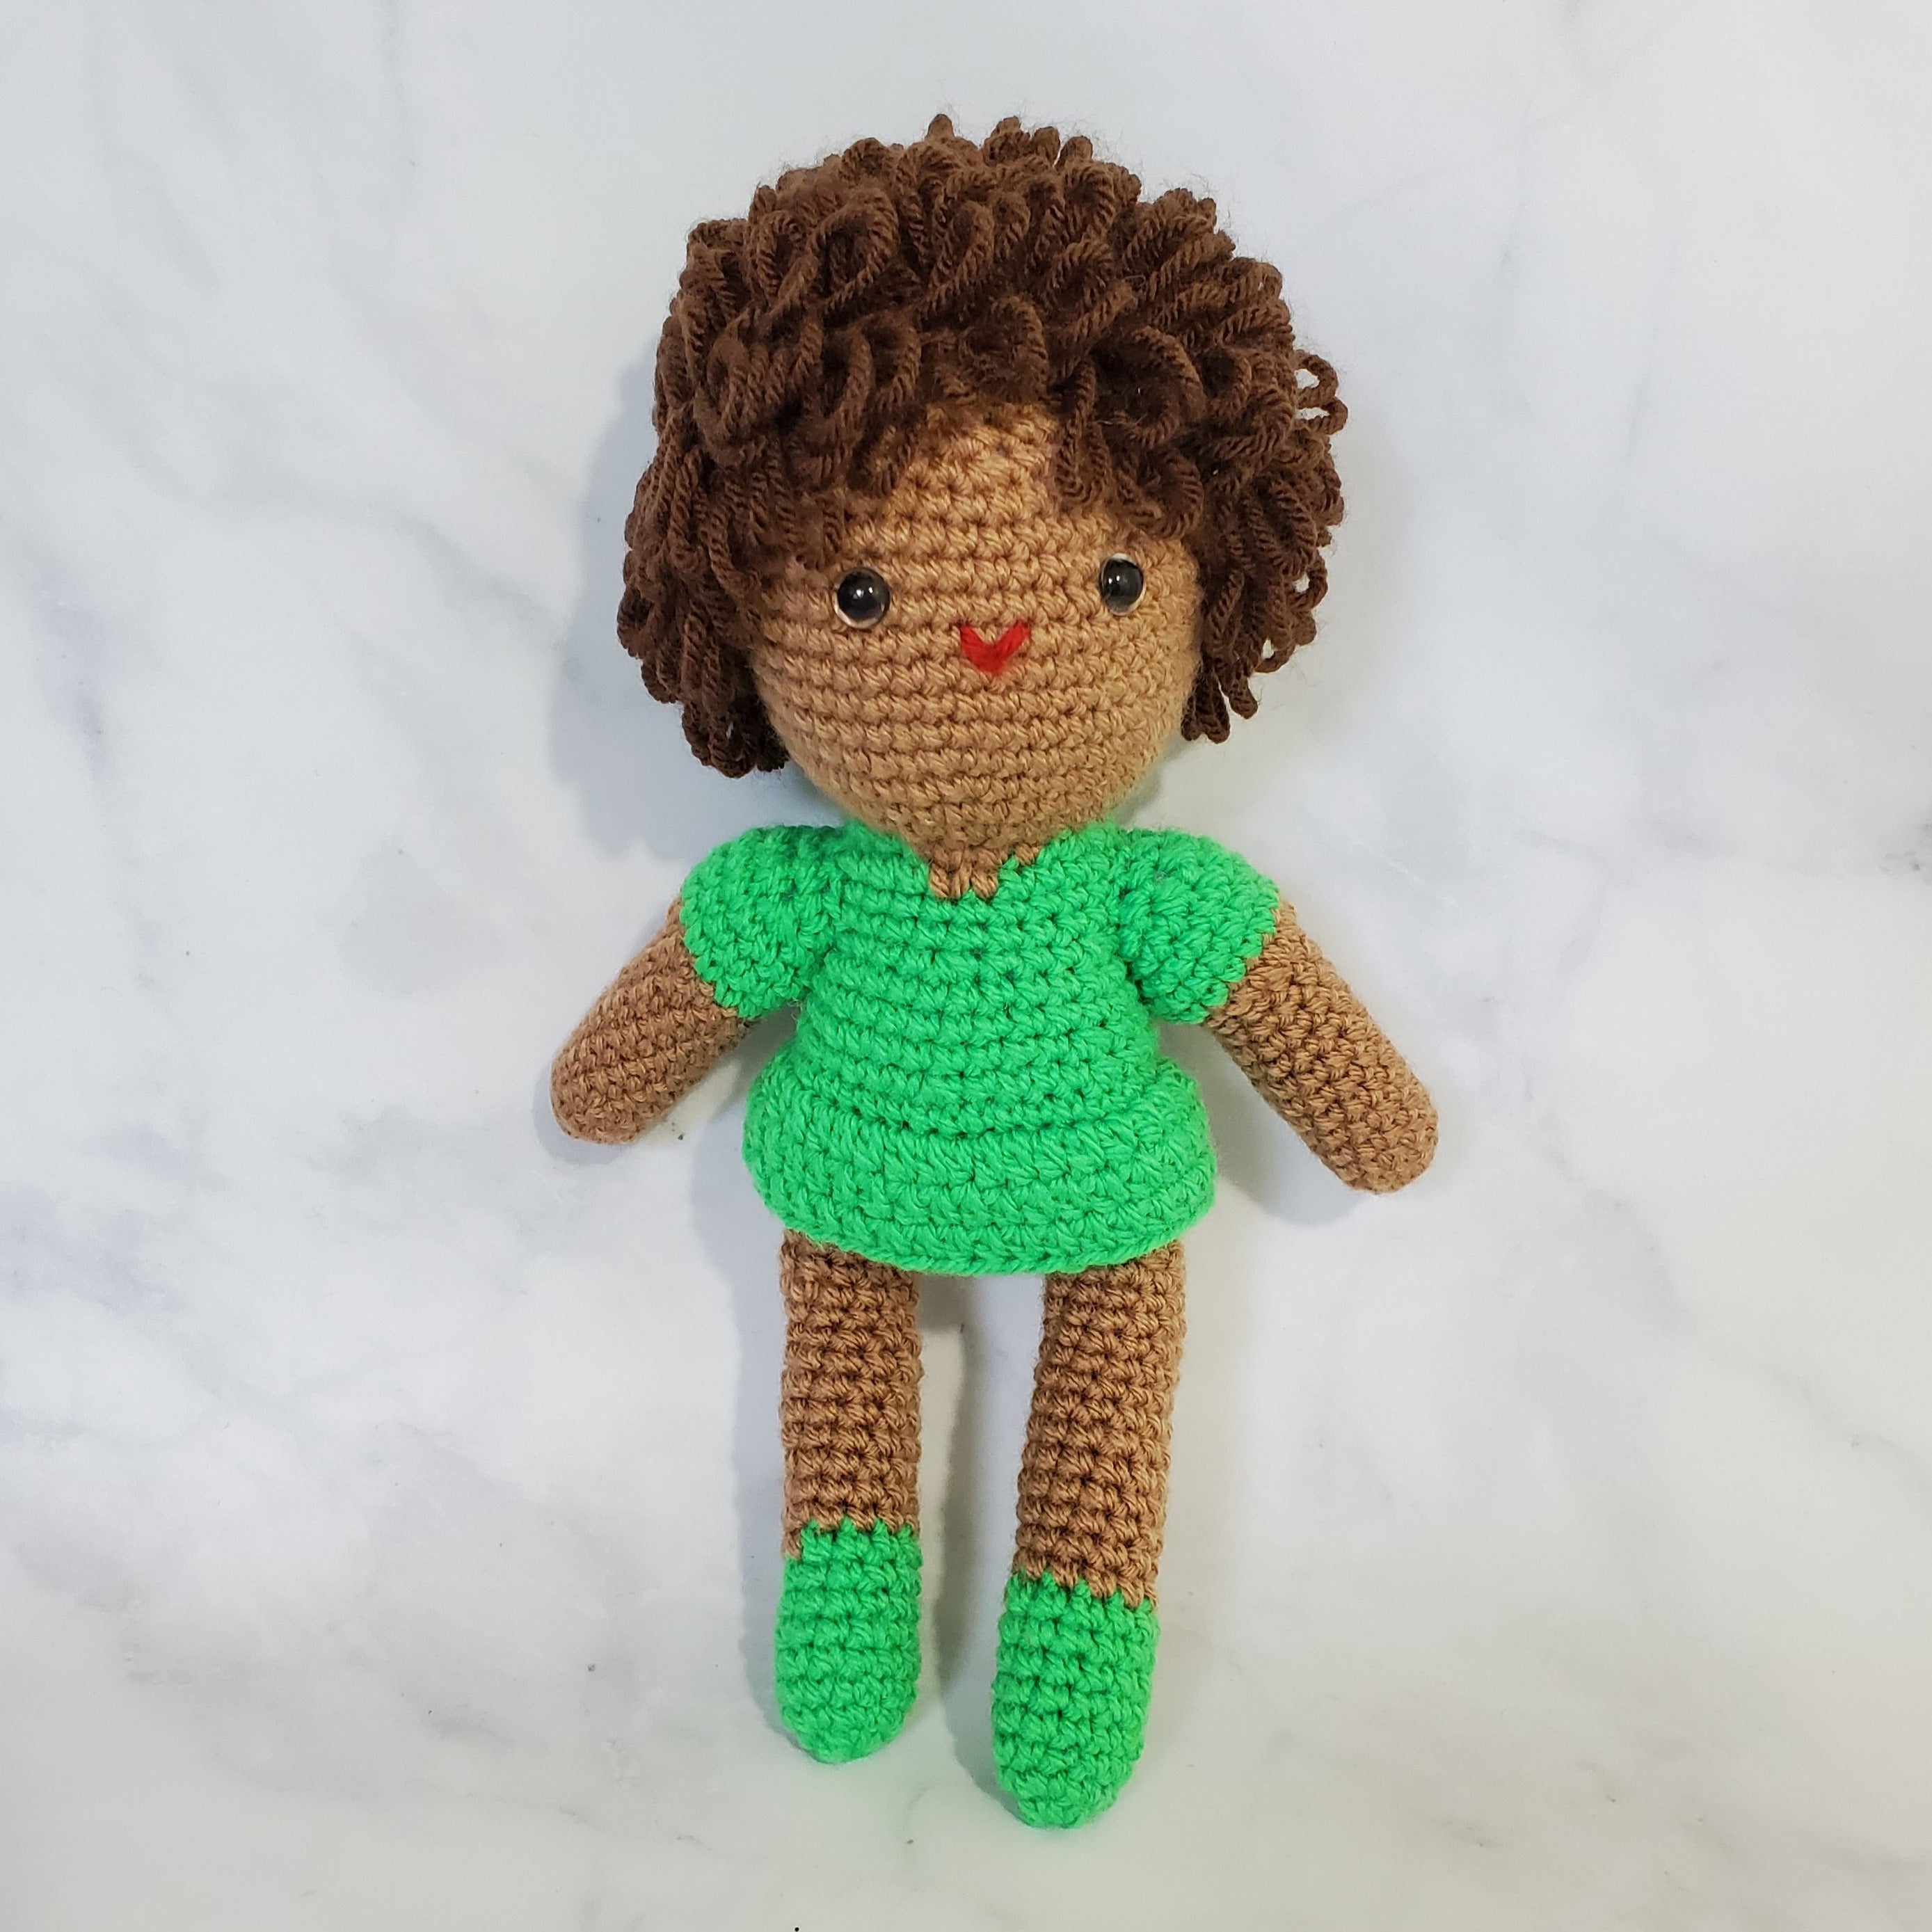 Doll Girl with Curly Hair (B) - 10 Inch